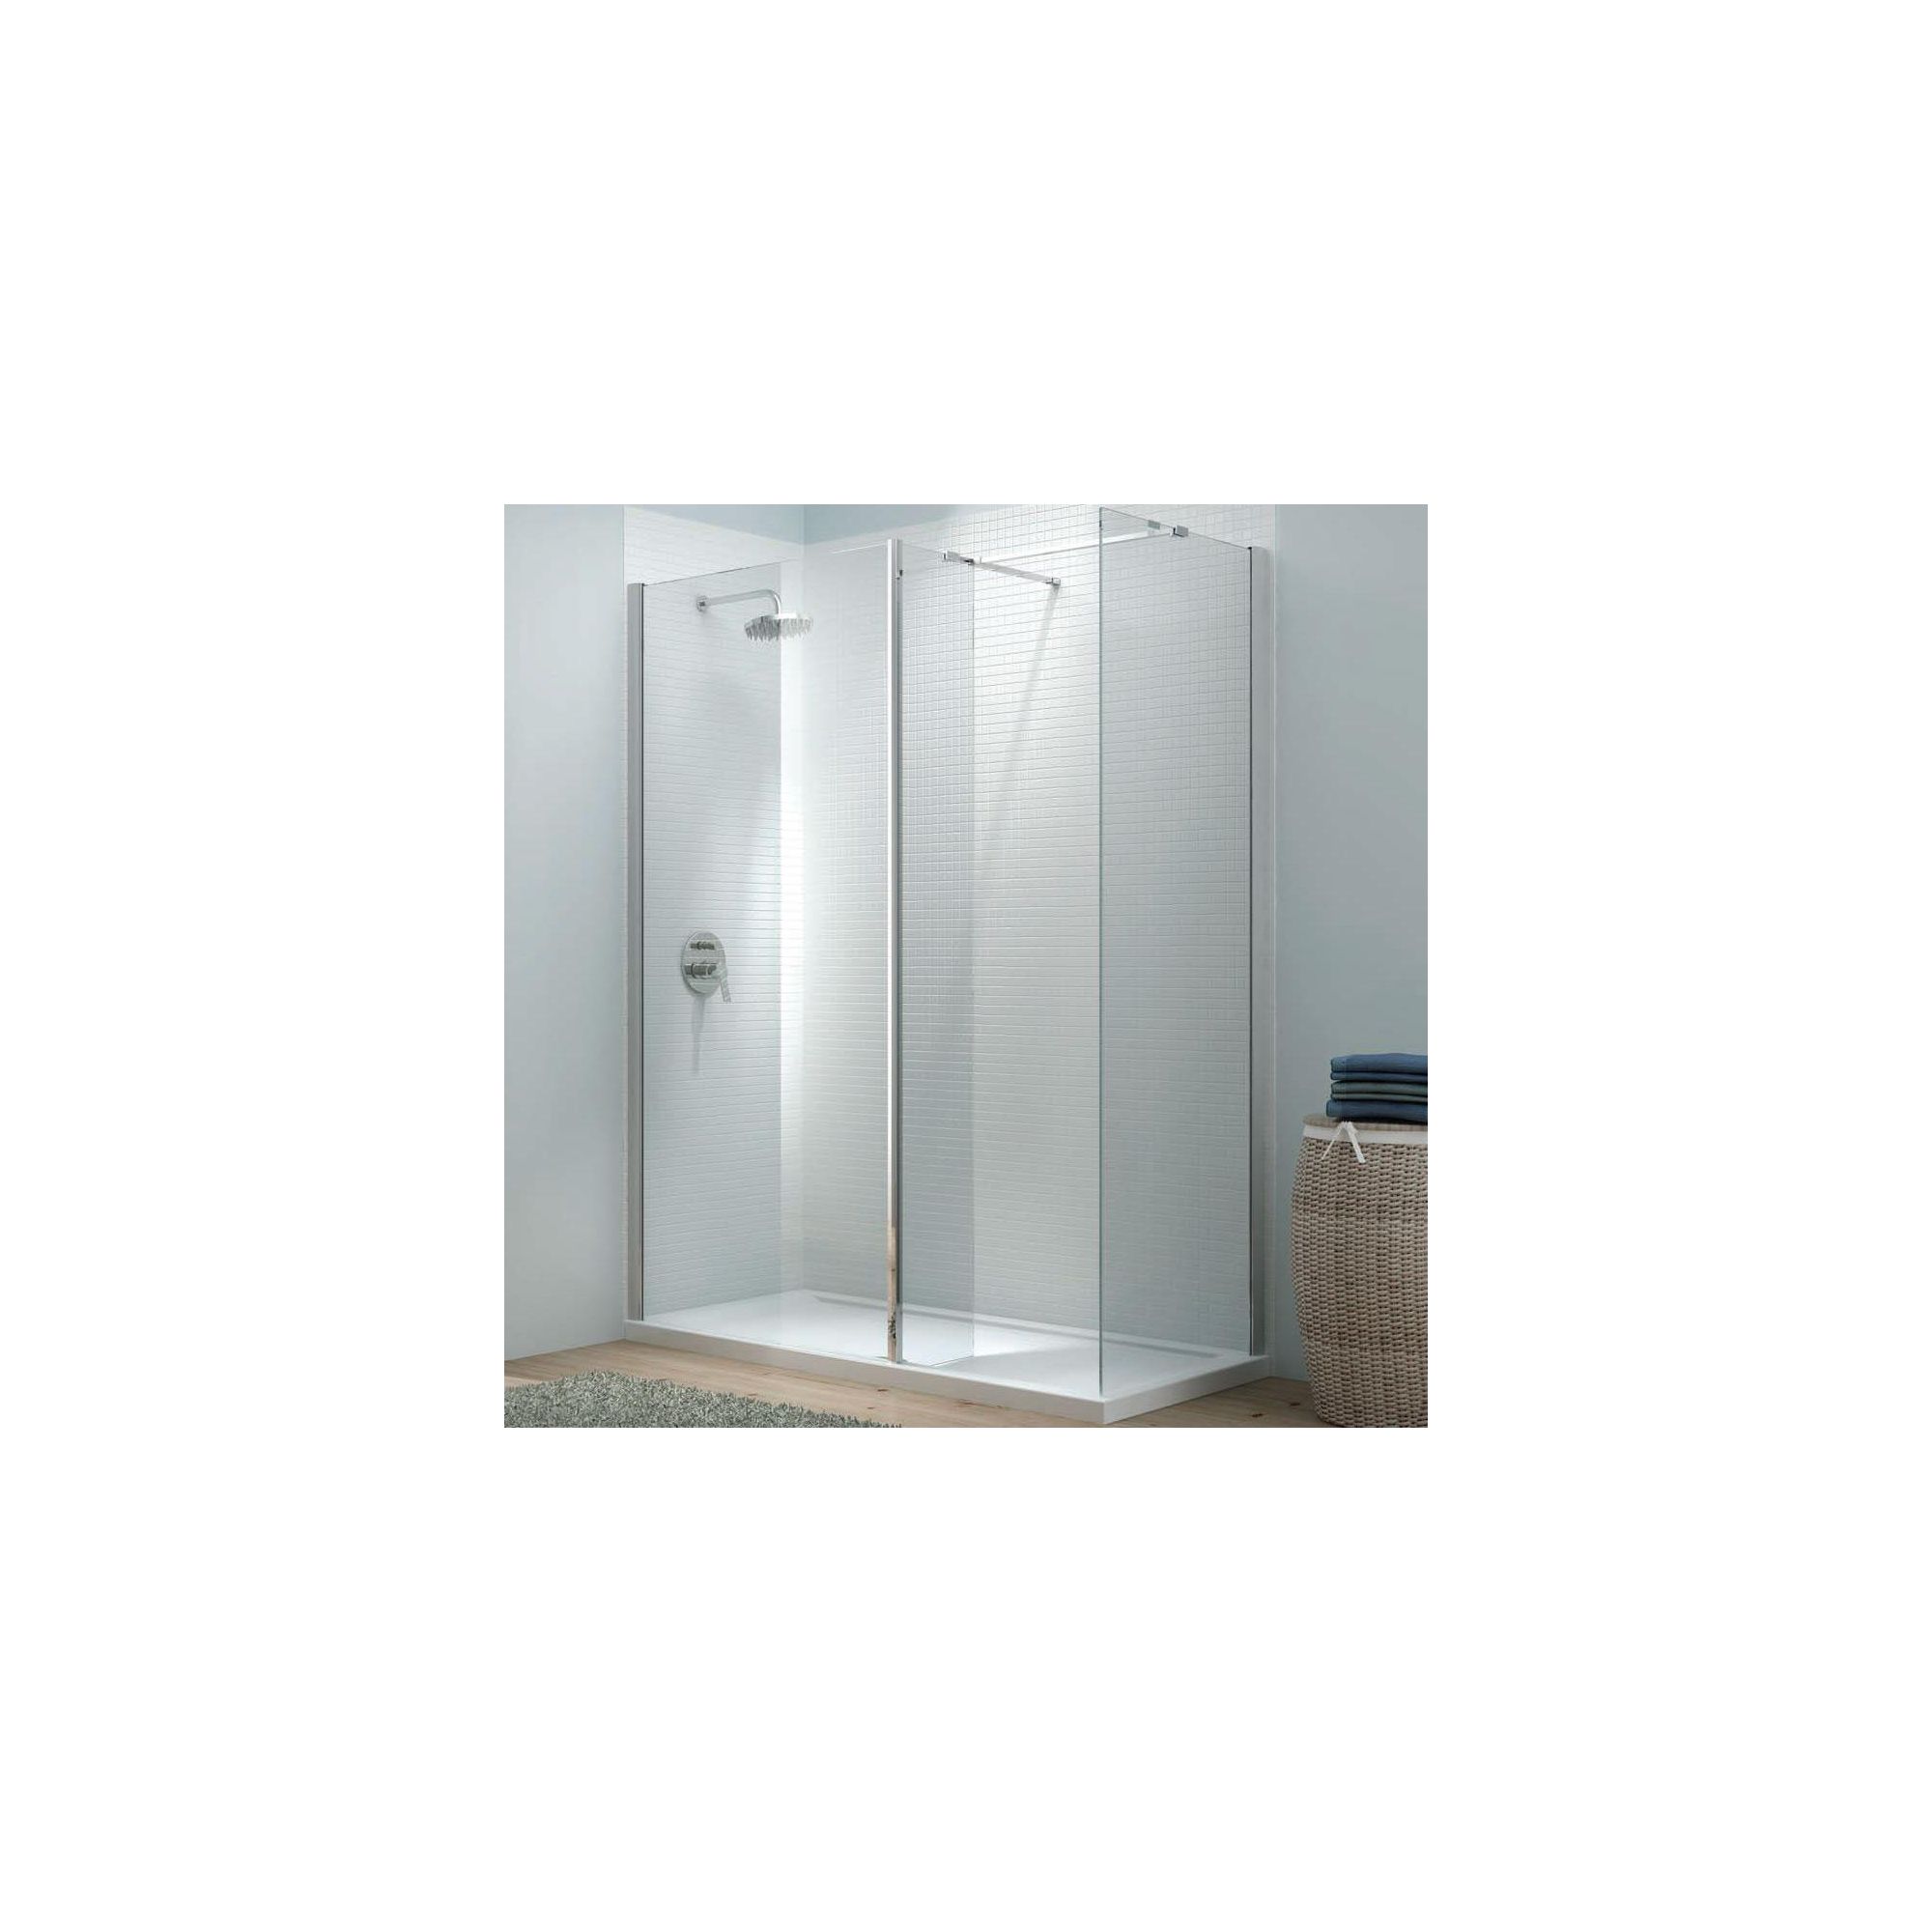 Merlyn Vivid Eight Cube Alcove Walk-In Shower Enclosure, 1700mm x 800mm, Low Profile Tray, 8mm Glass at Tescos Direct